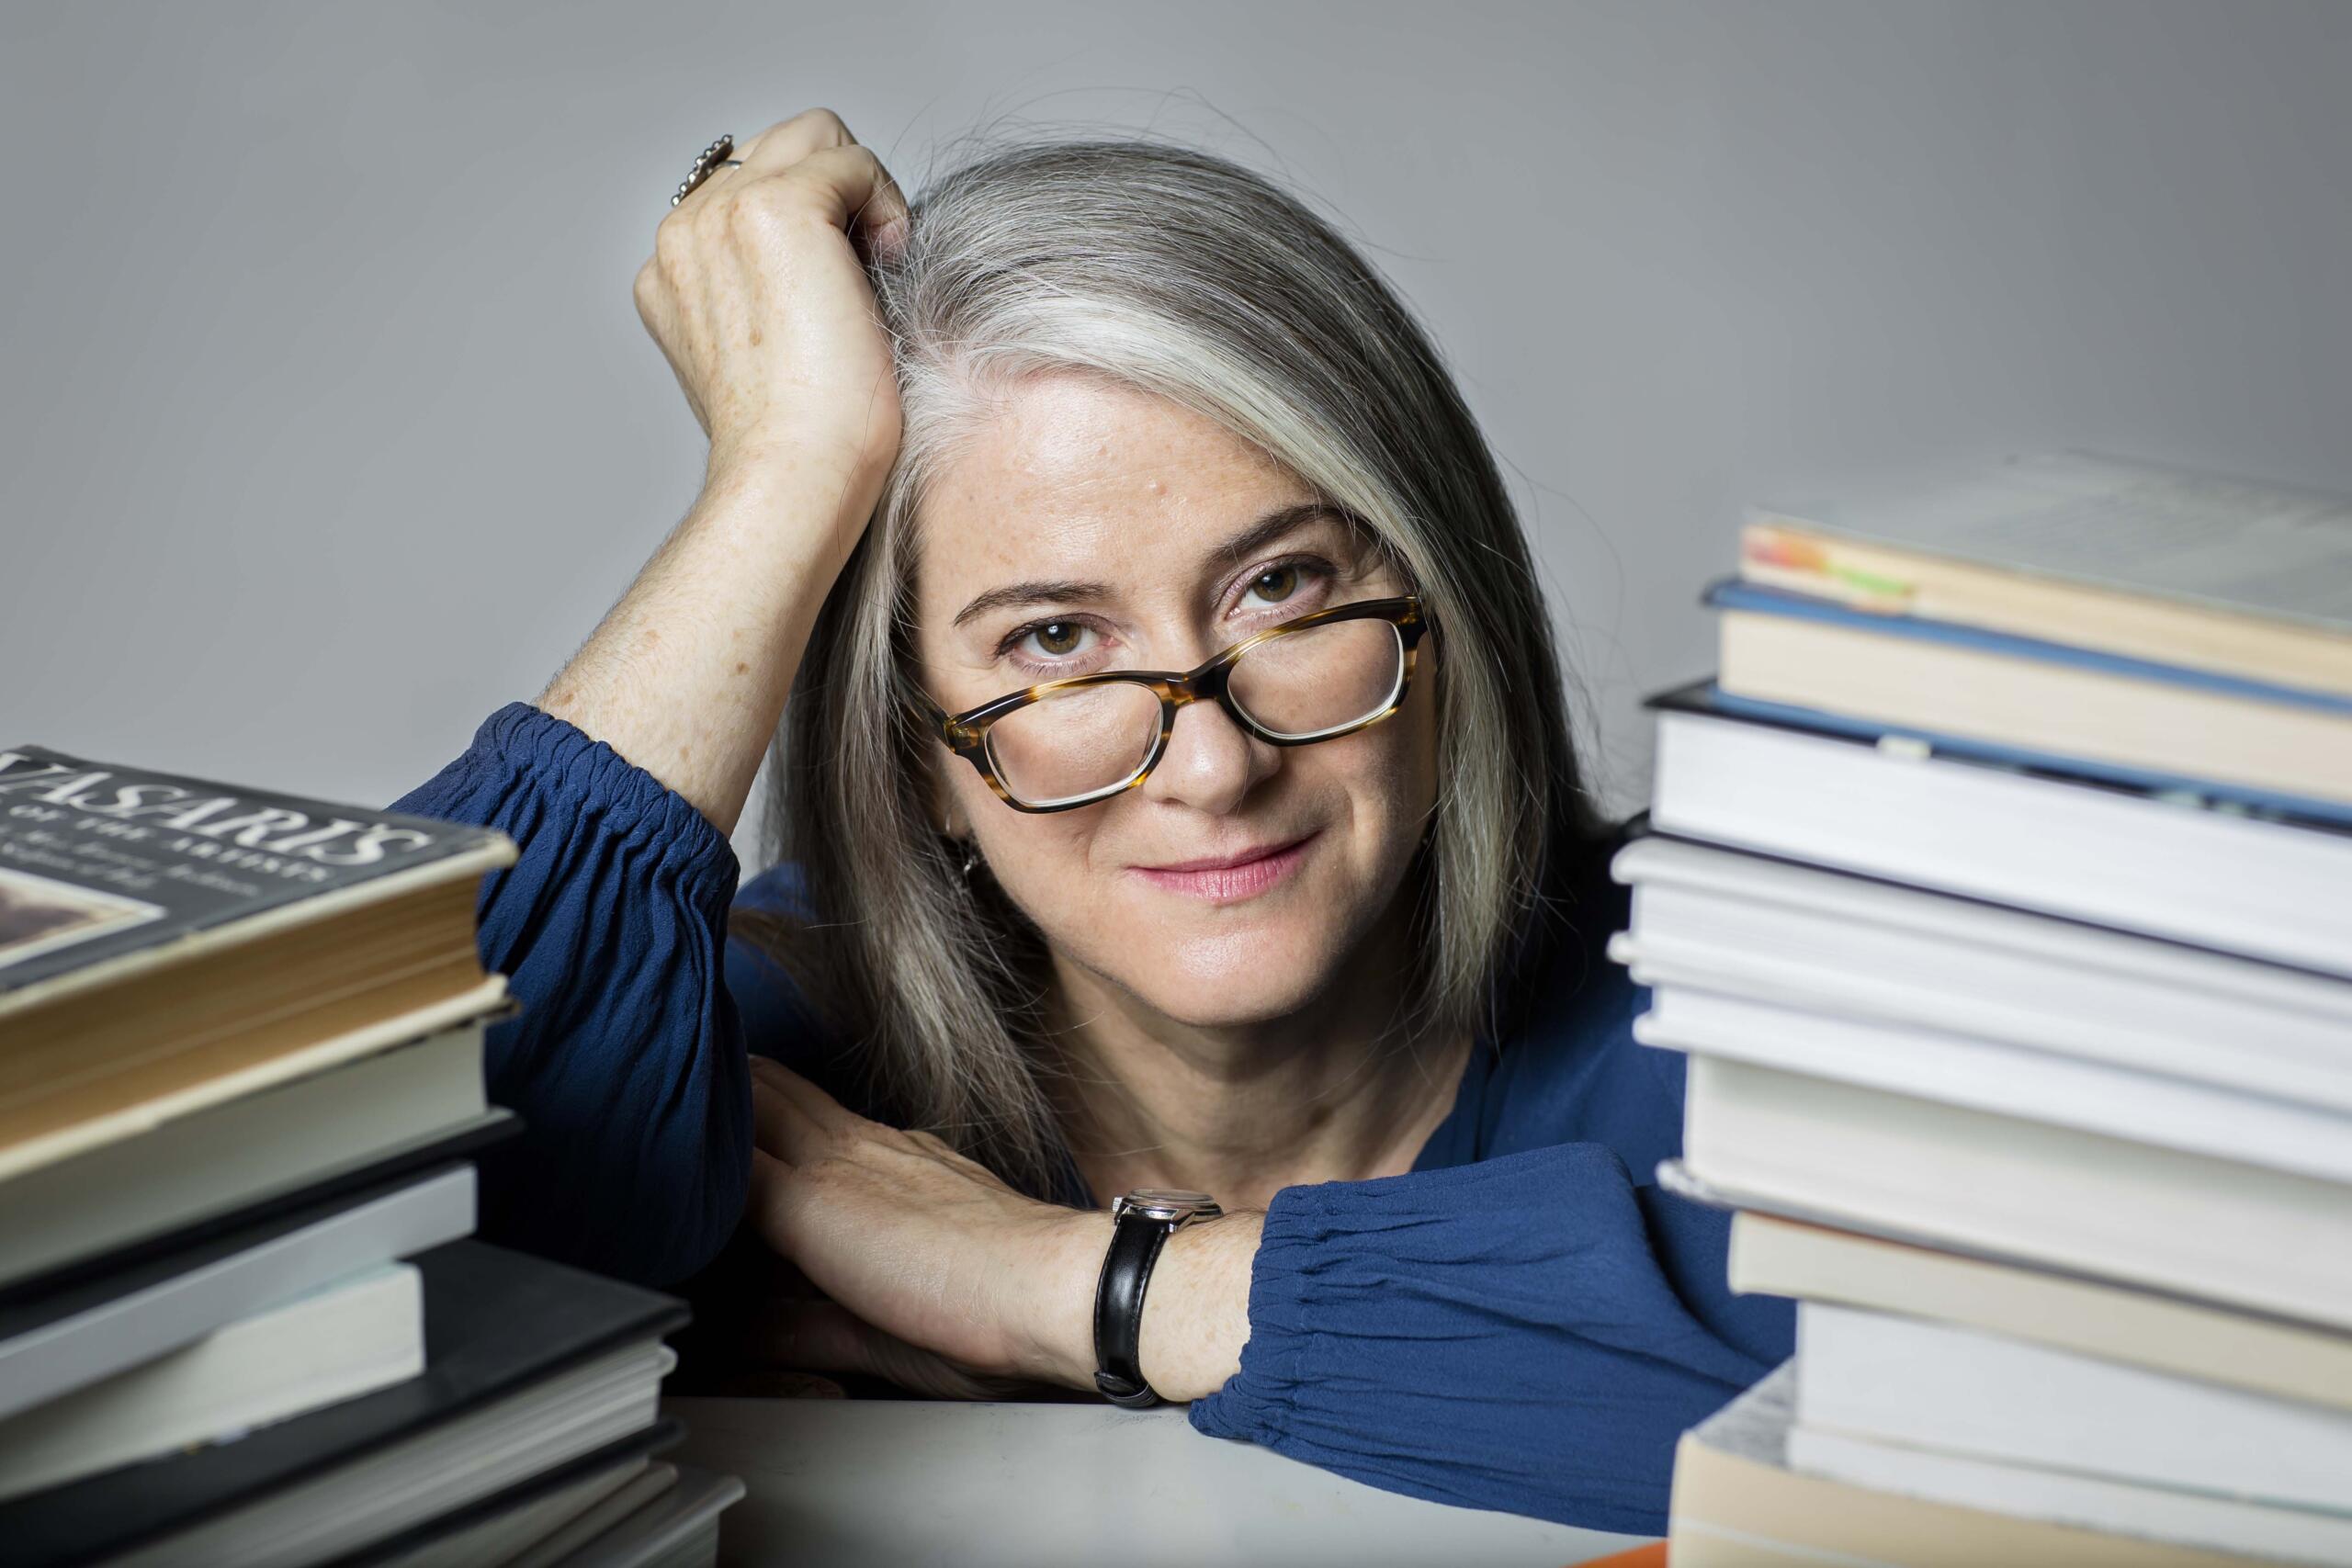 Milène J. Fernándaz is a gray-haired woman with glasses that are low on the bridge of her nose. Srests her arms on a table with stacks of books in the foreground.